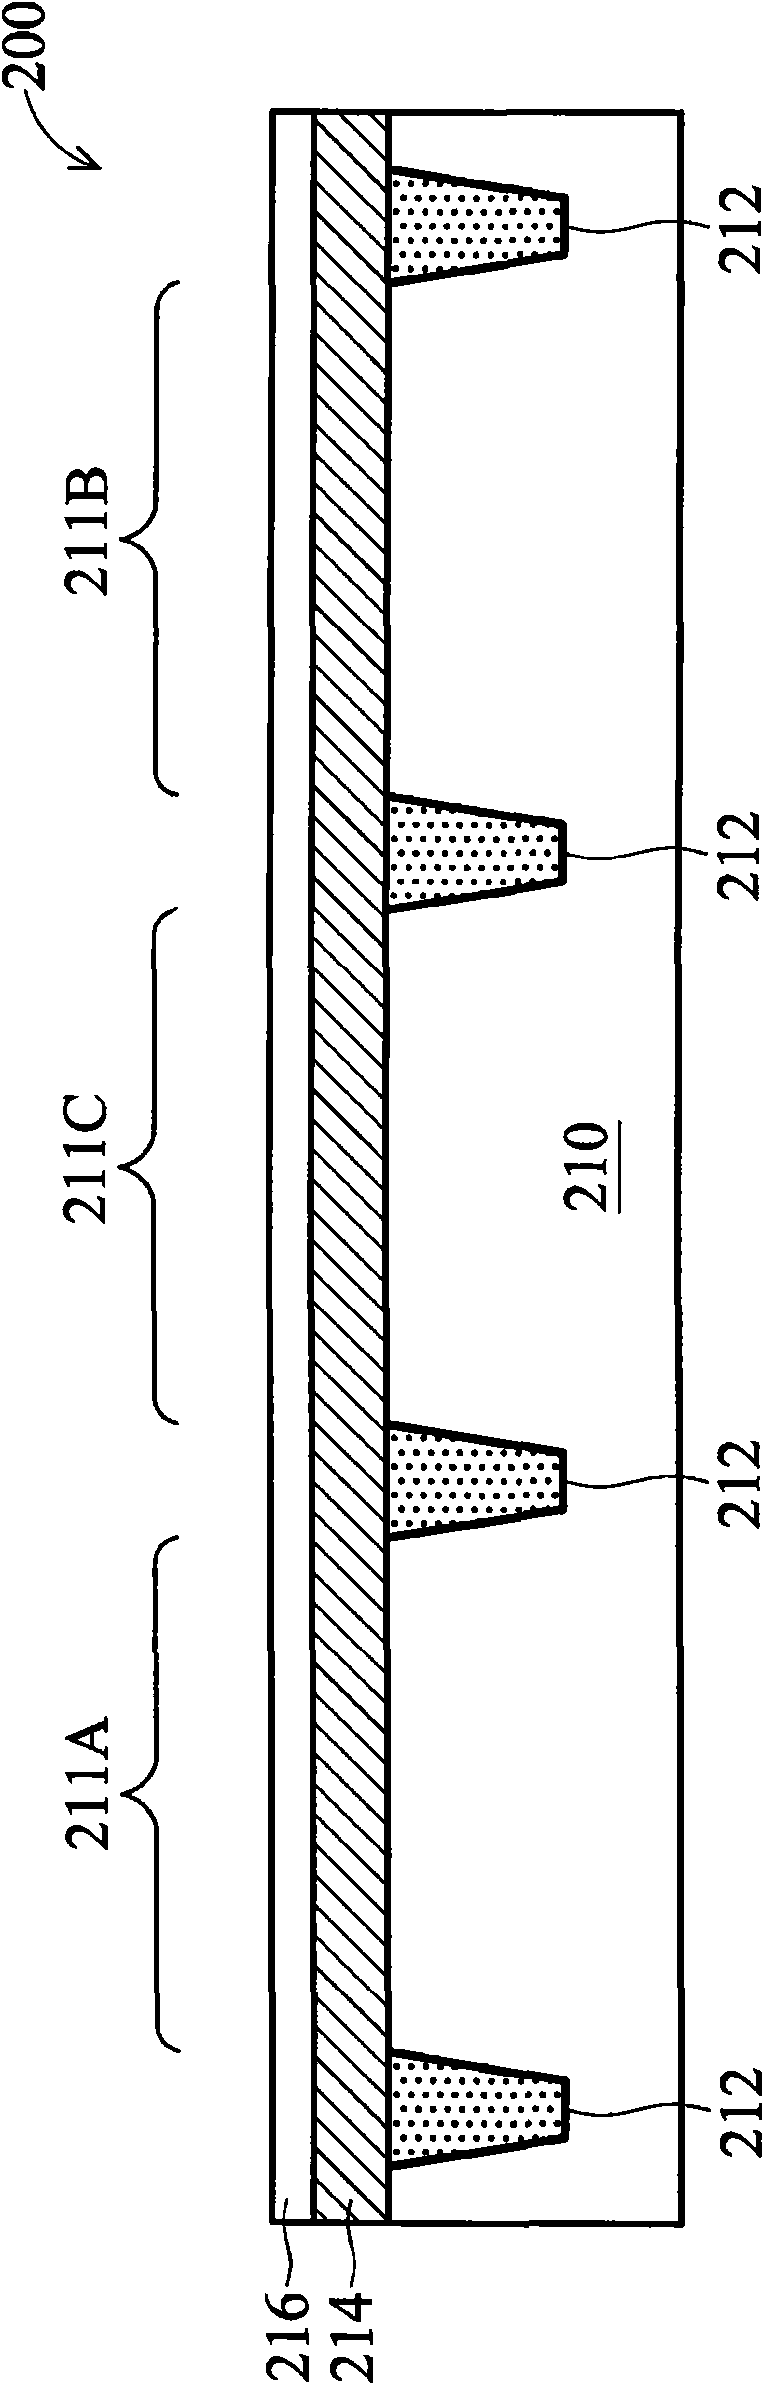 Method for fabricating an integrated circuit device